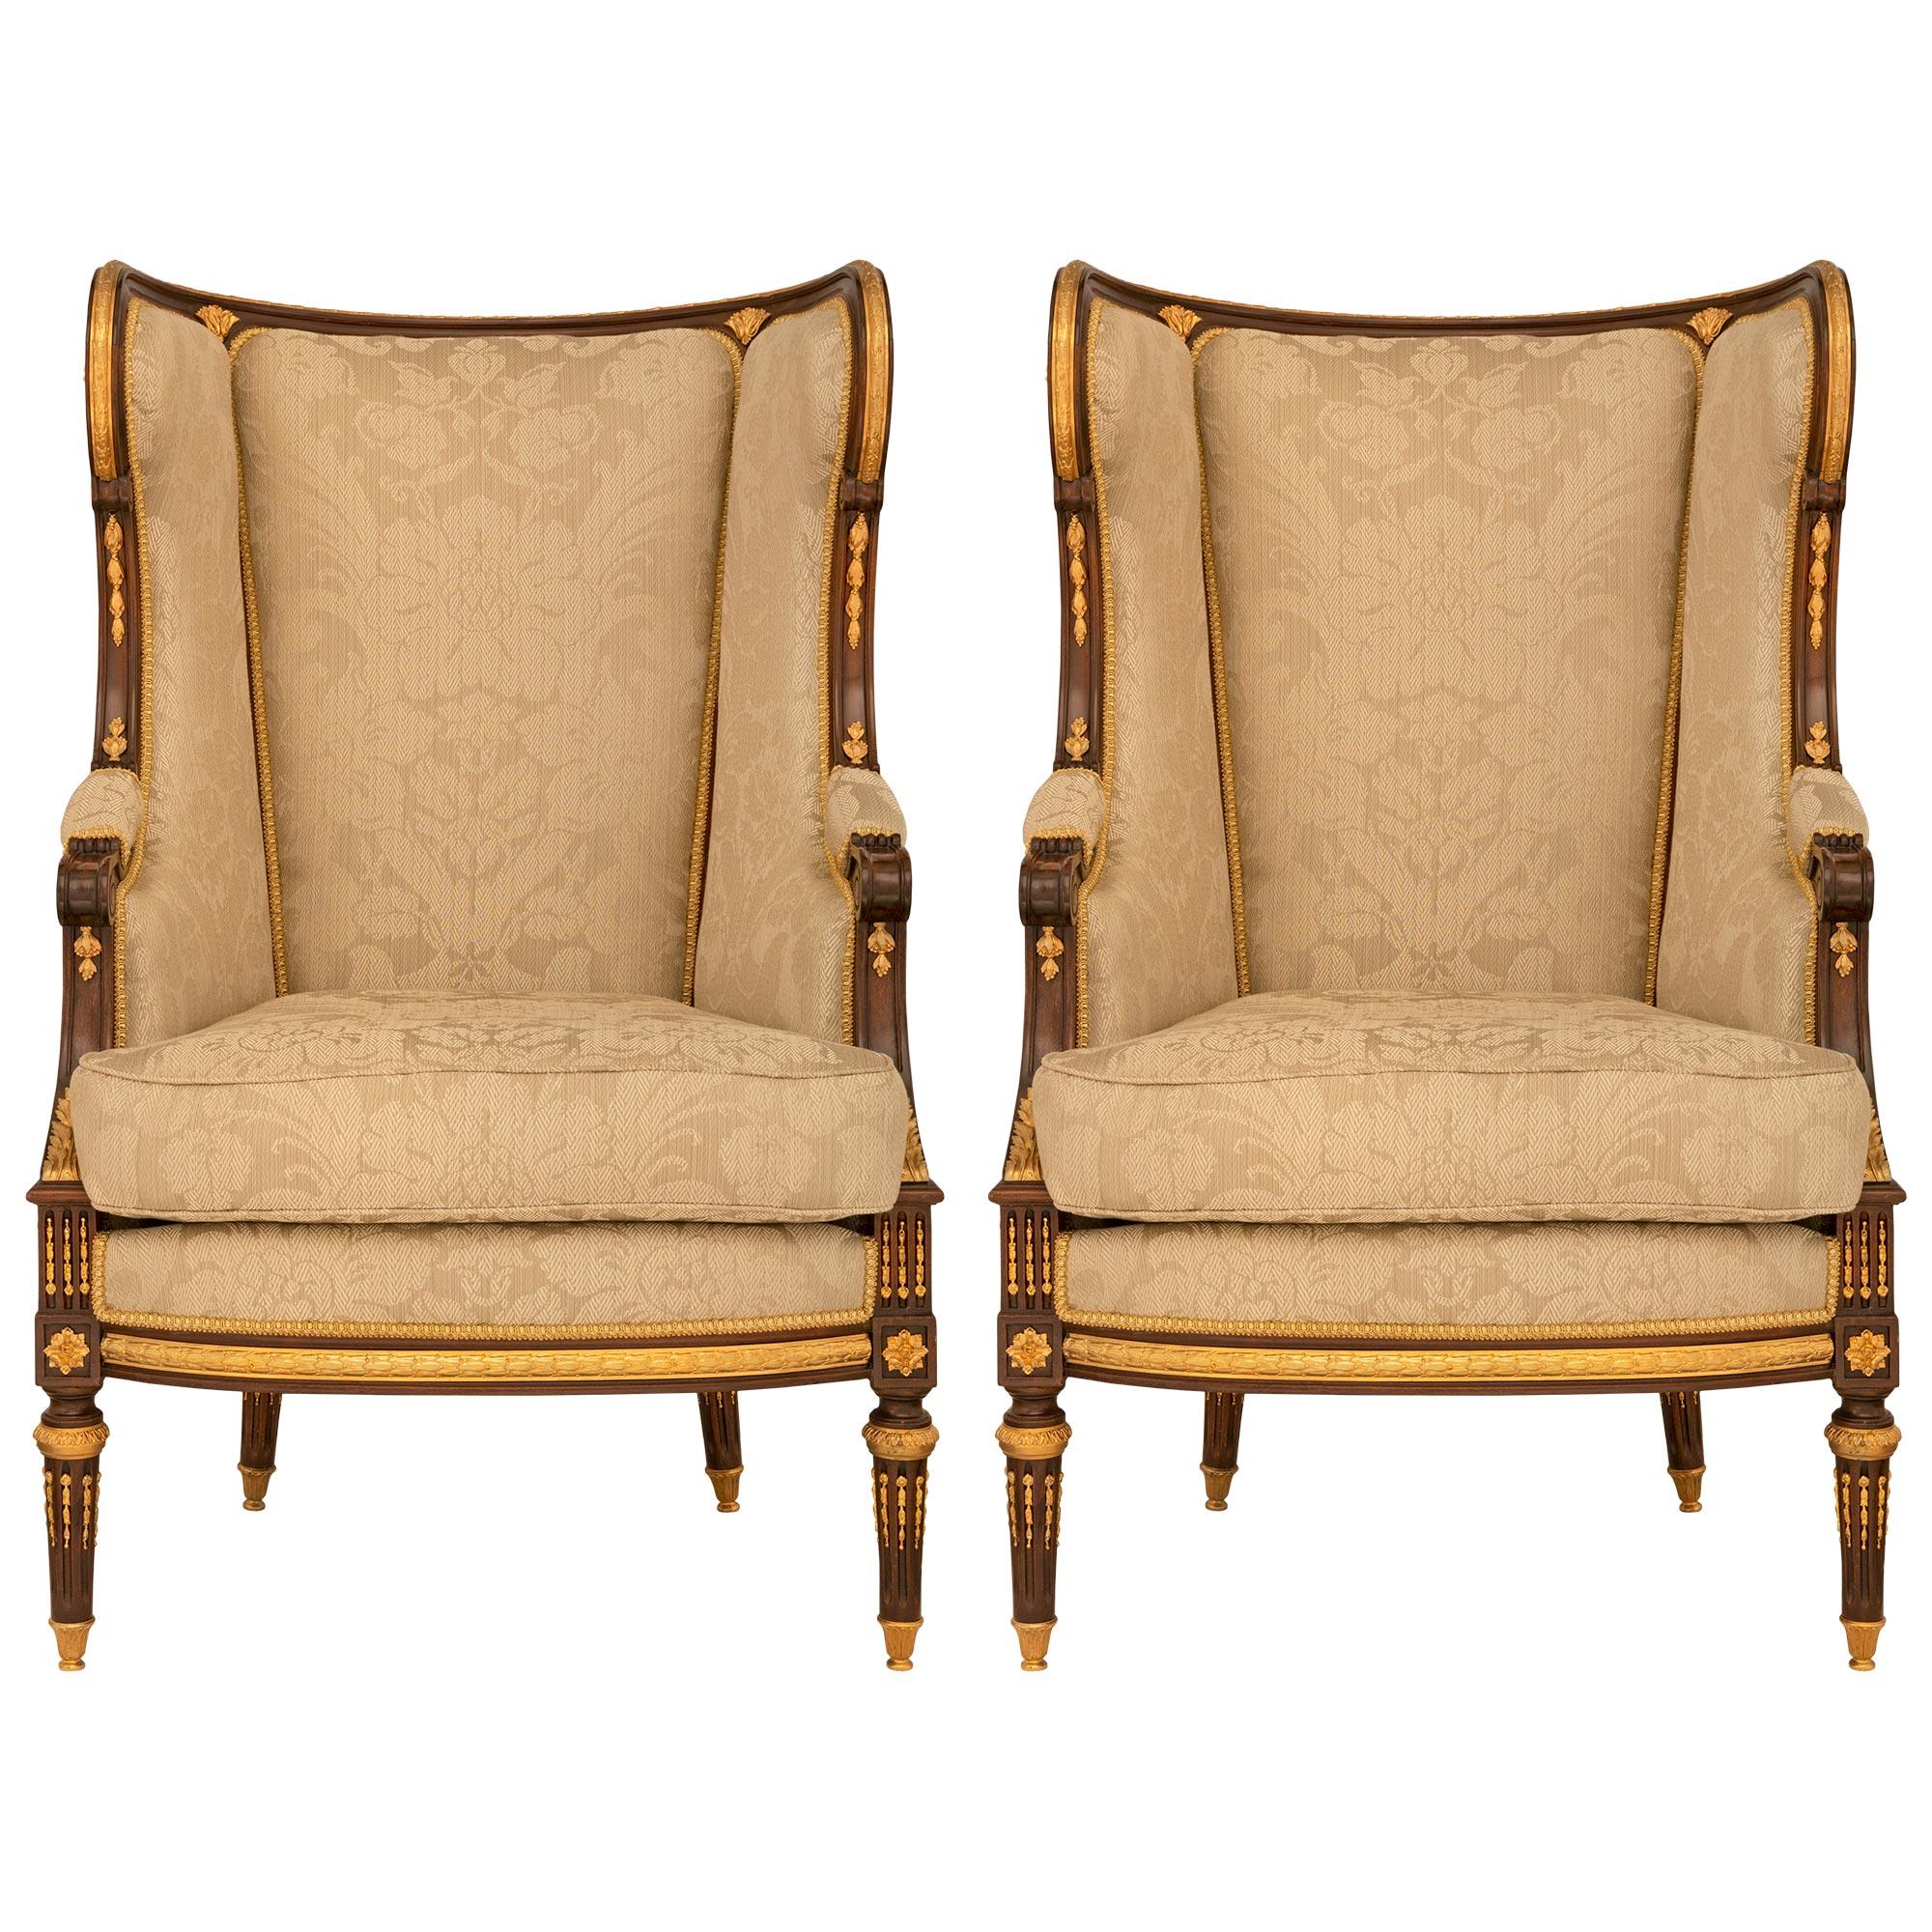 Pair of French 19th Century Belle Époque Period Mahogany & Ormolu Armchairs For Sale 6